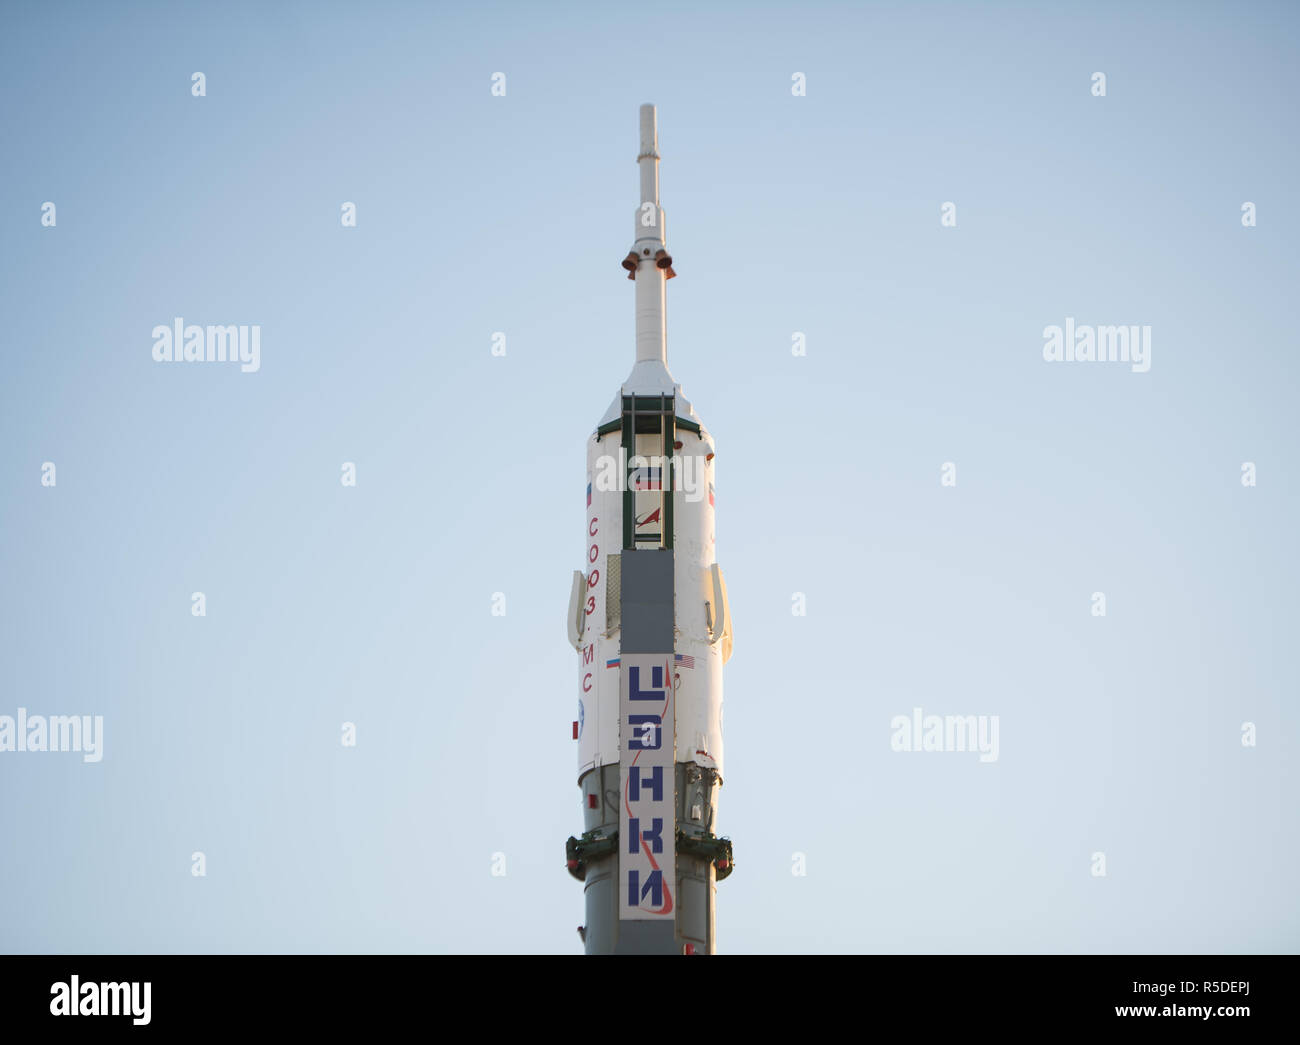 Baikonur, Kazakhstan, 1st December 2018. The Soyuz booster rocket and MS-11 spacecraft is upright on the launch pad early morning at the Baikonur Cosmodrome December 1, 2018 in Baikonur, Kazakhstan. The rocket will carry Expedition 58 crew members Russian Oleg Kononenko of Roscosmos, American Anne McClain and Canadian David Saint-Jacques to the International Space Station on December 3rd. Credit: Planetpix/Alamy Live News Stock Photo